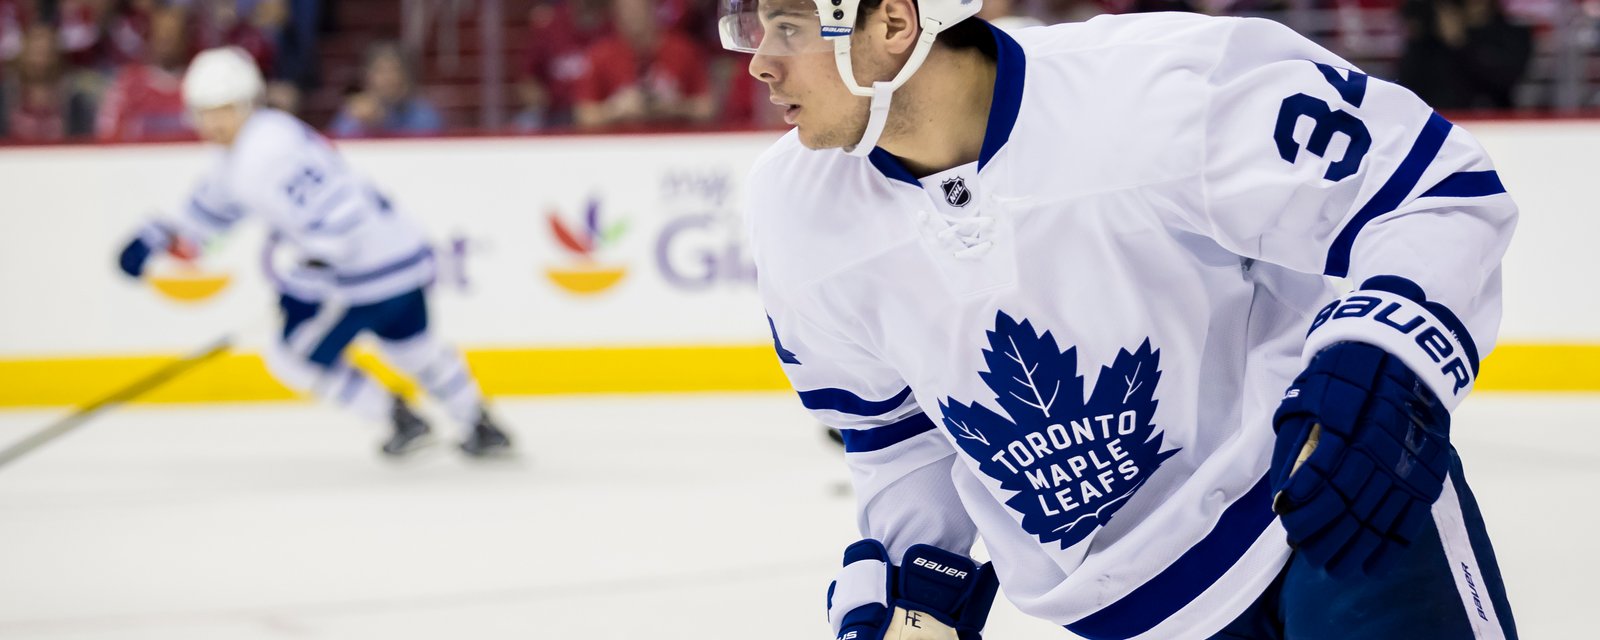 Your Call: How much should Auston Matthews get paid?